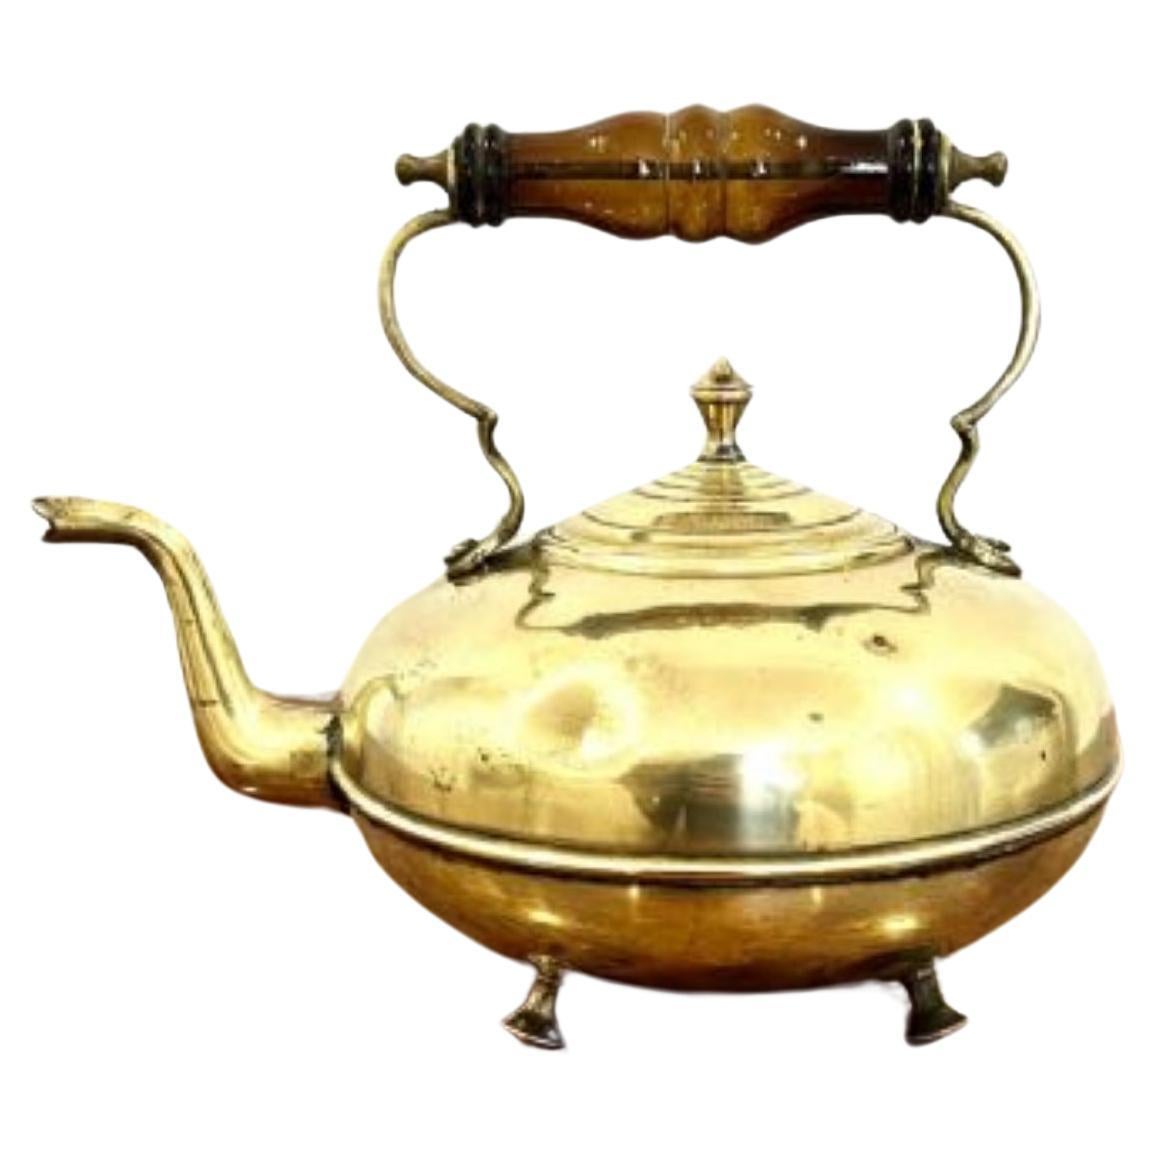 Unusual quality round antique Victorian brass kettle For Sale